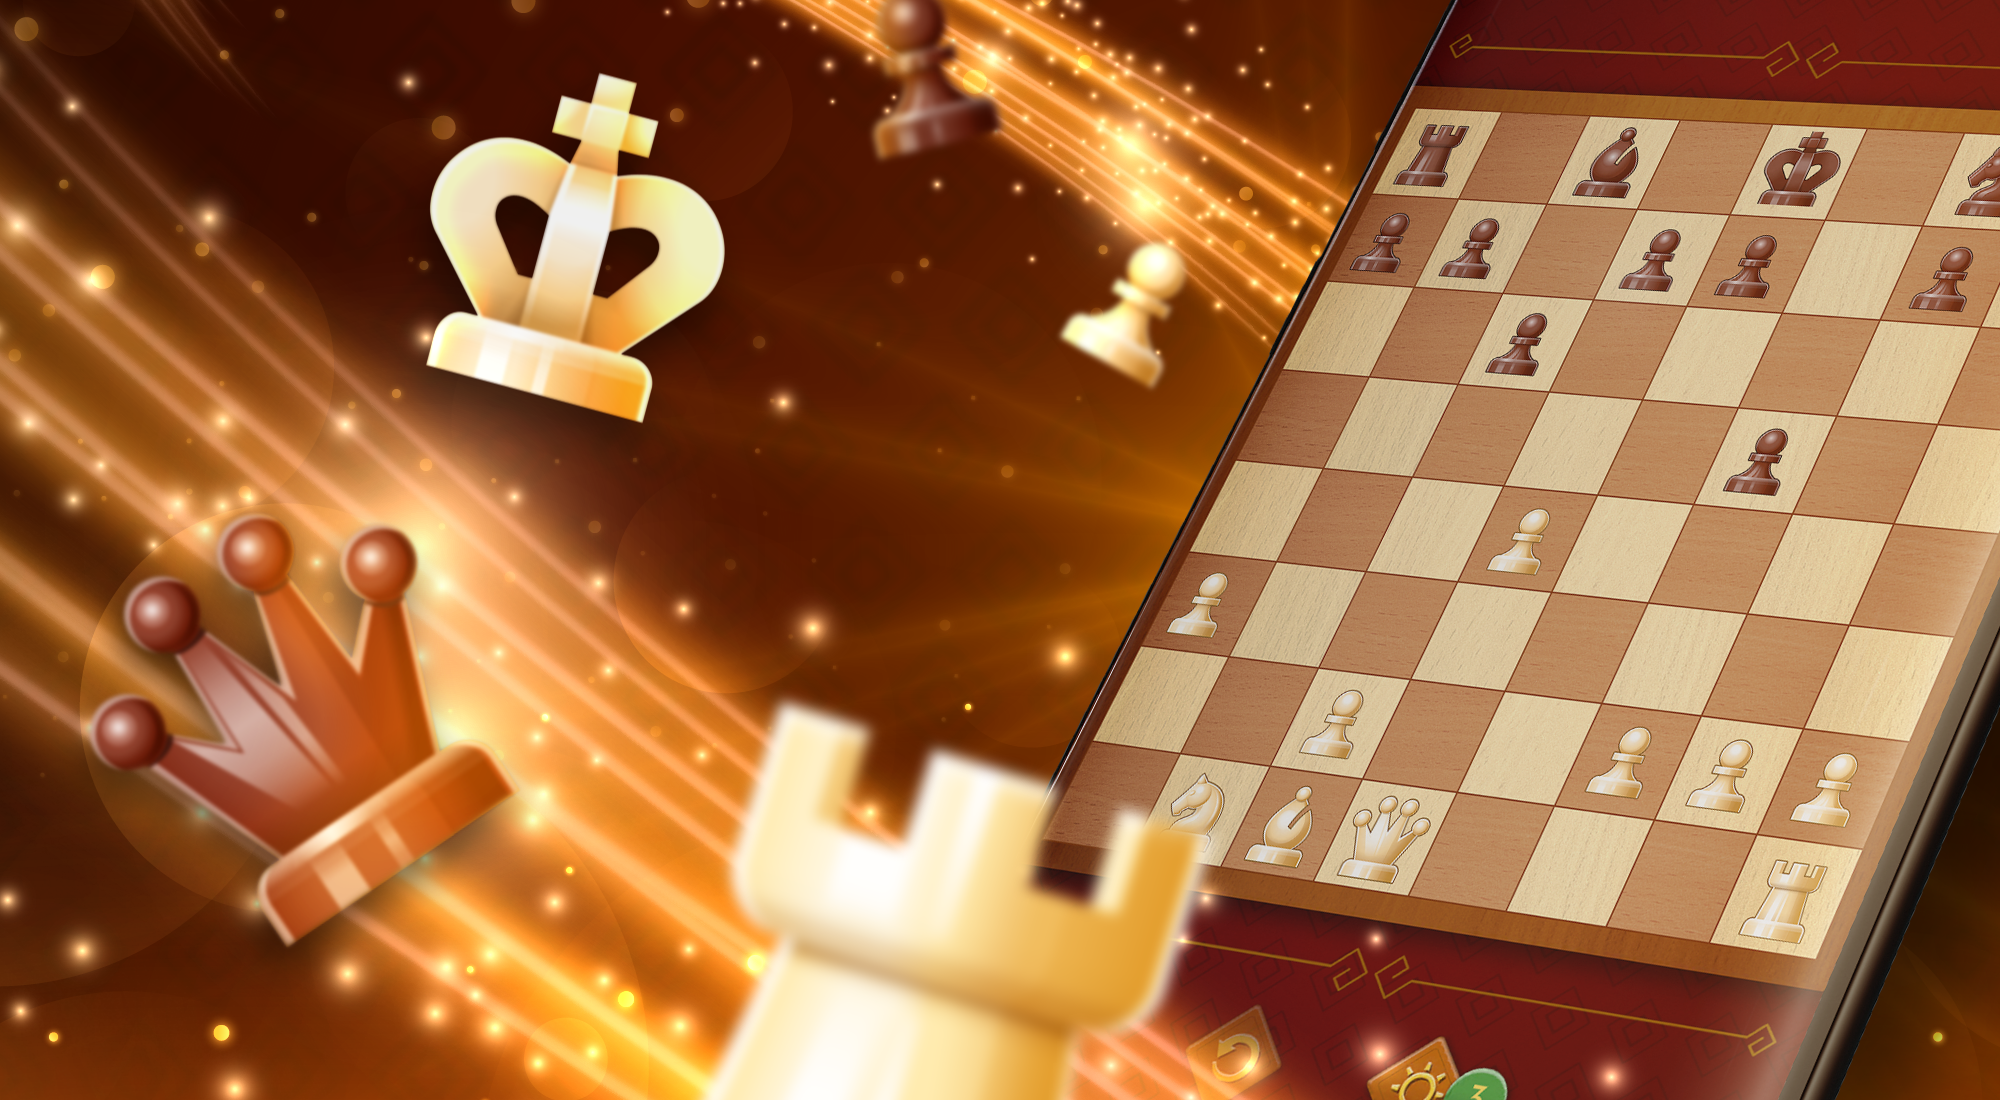 Download Chess - Clash of Kings APKs for Android - APKMirror